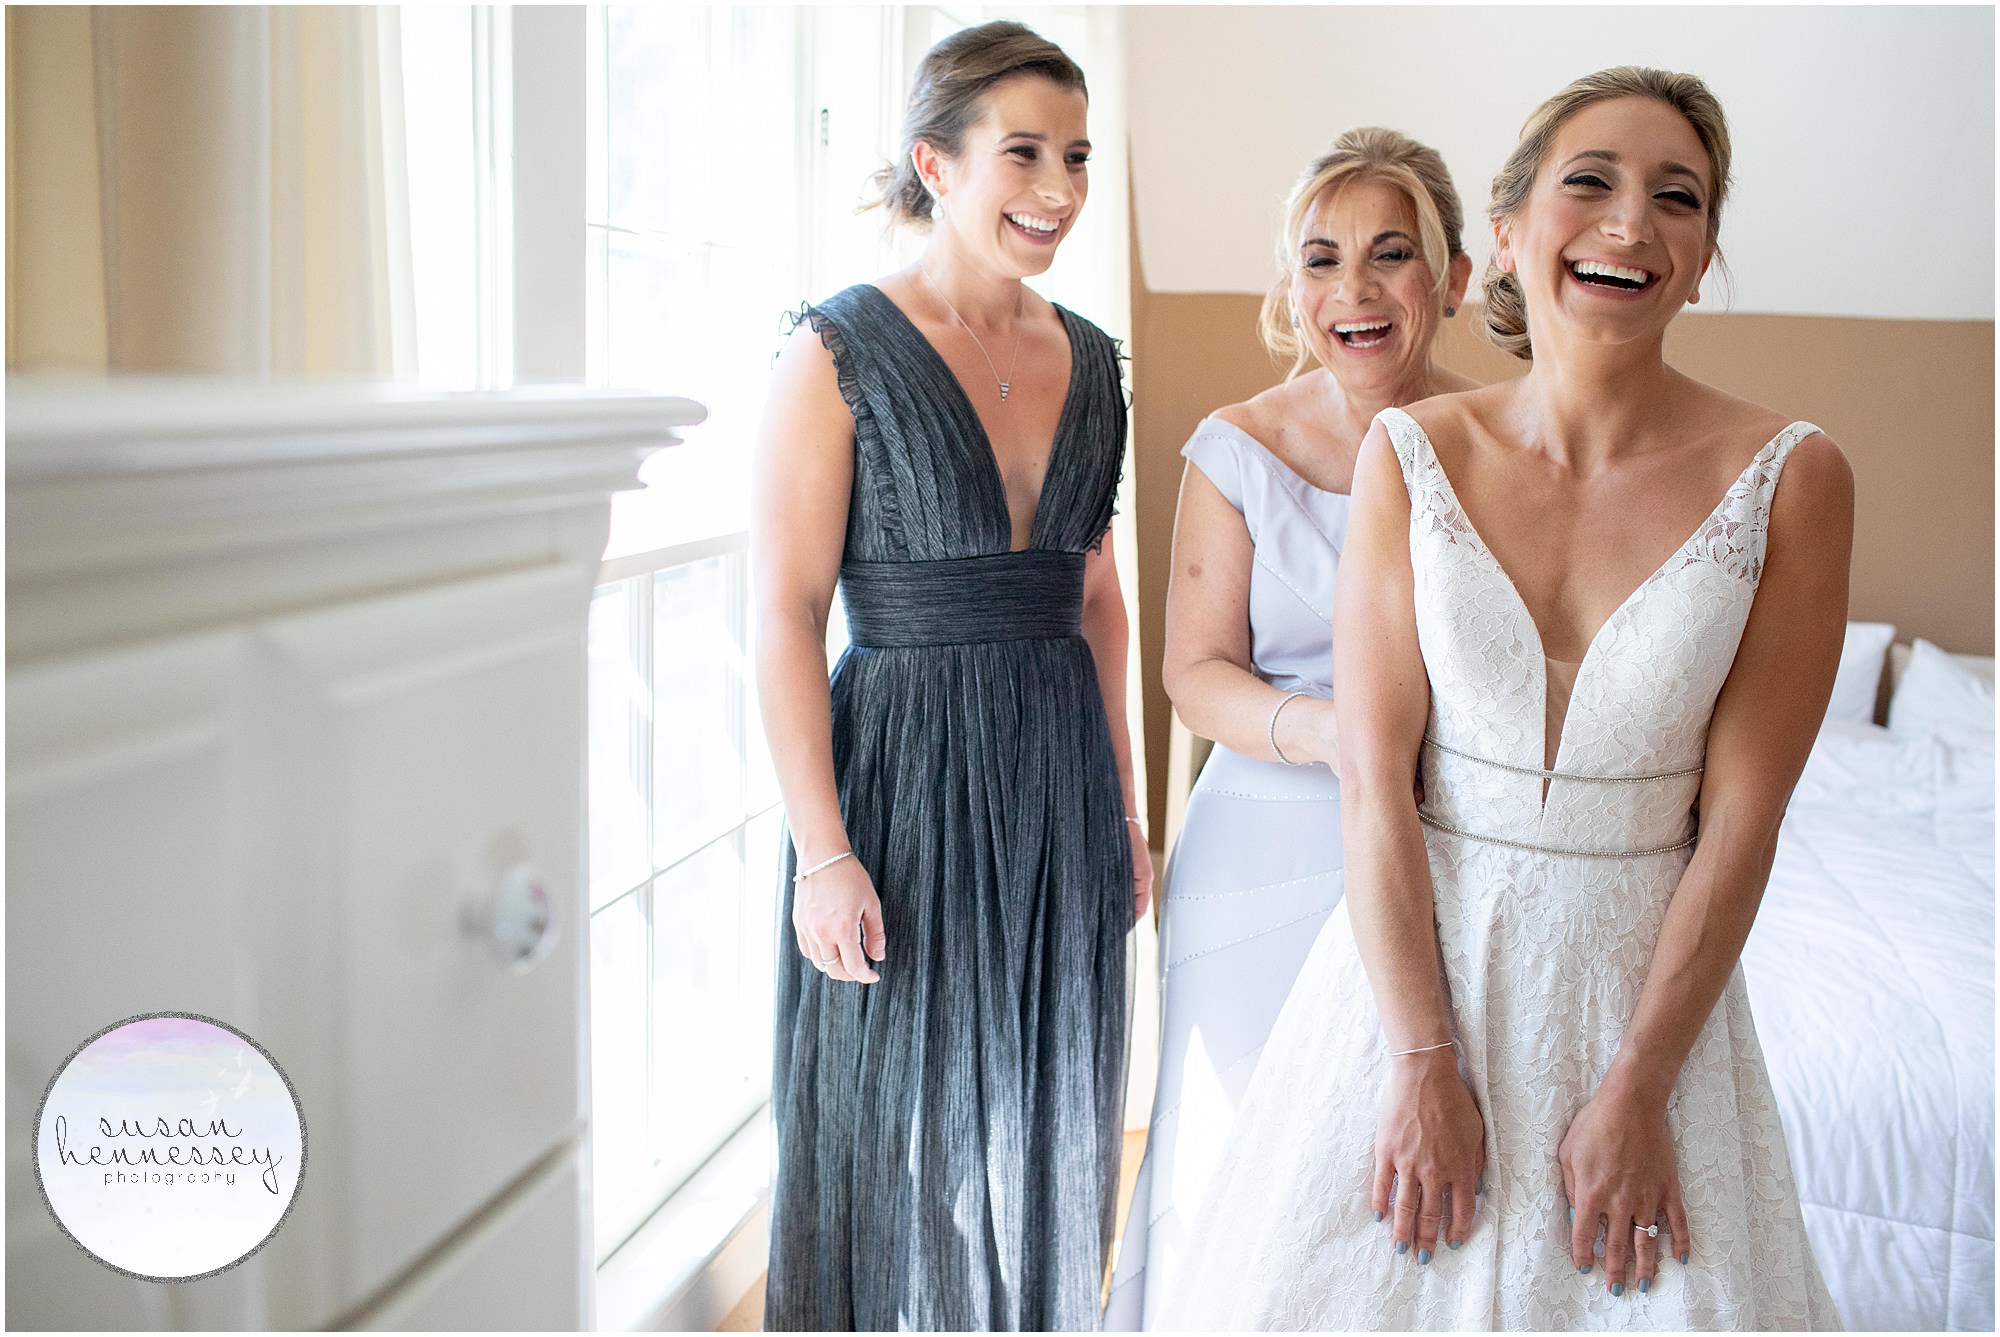 A bride, her mother and sister laugh while she gets zipped into her gown.